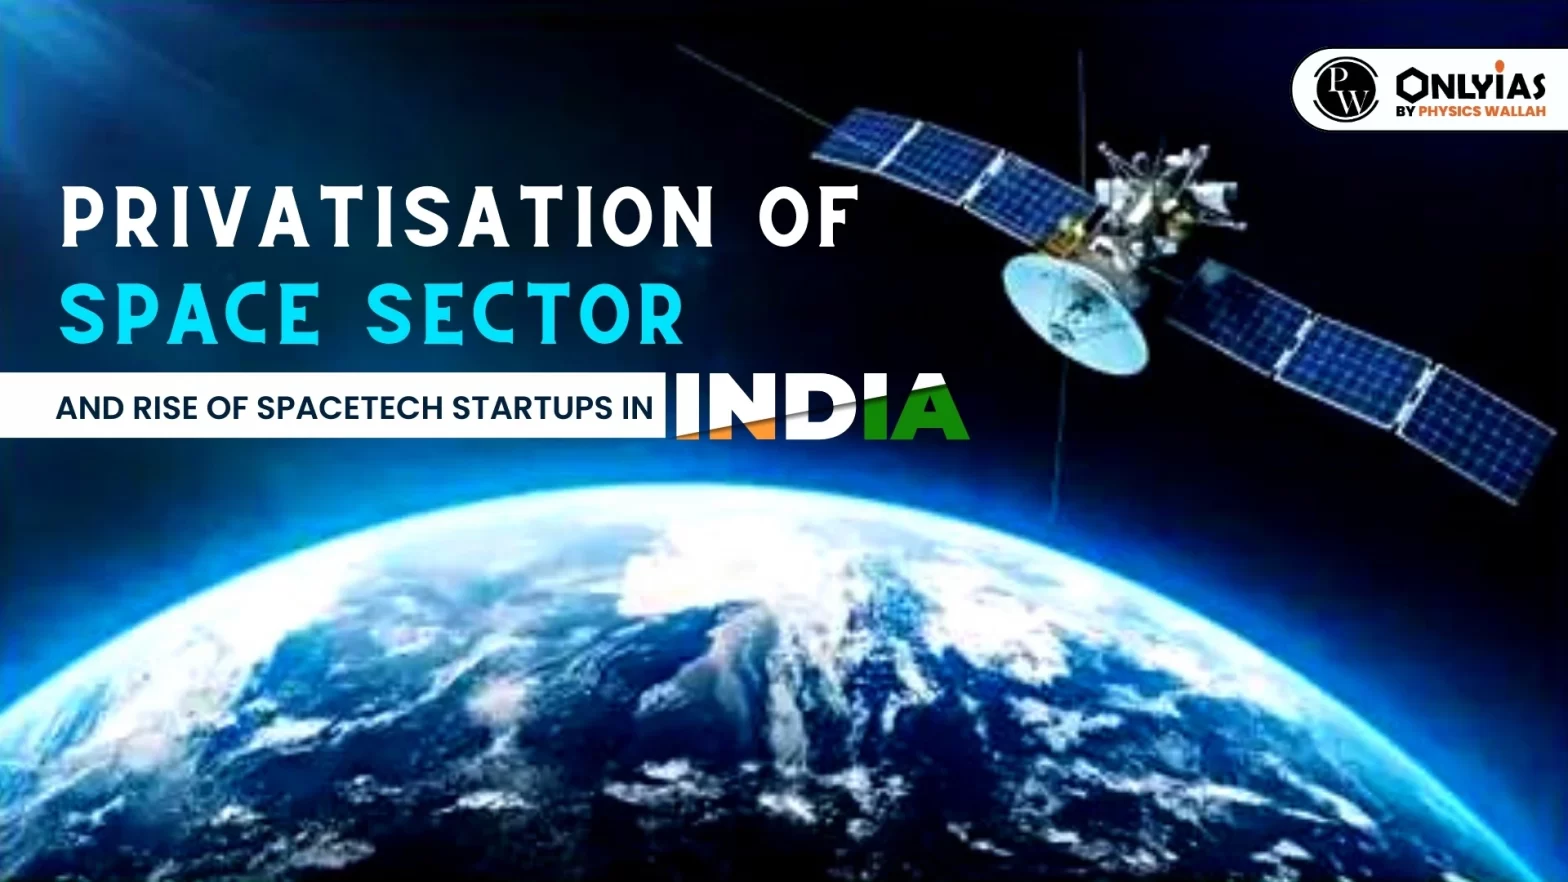 Privatisation of Space Sector and Rise of Spacetech Startups in India